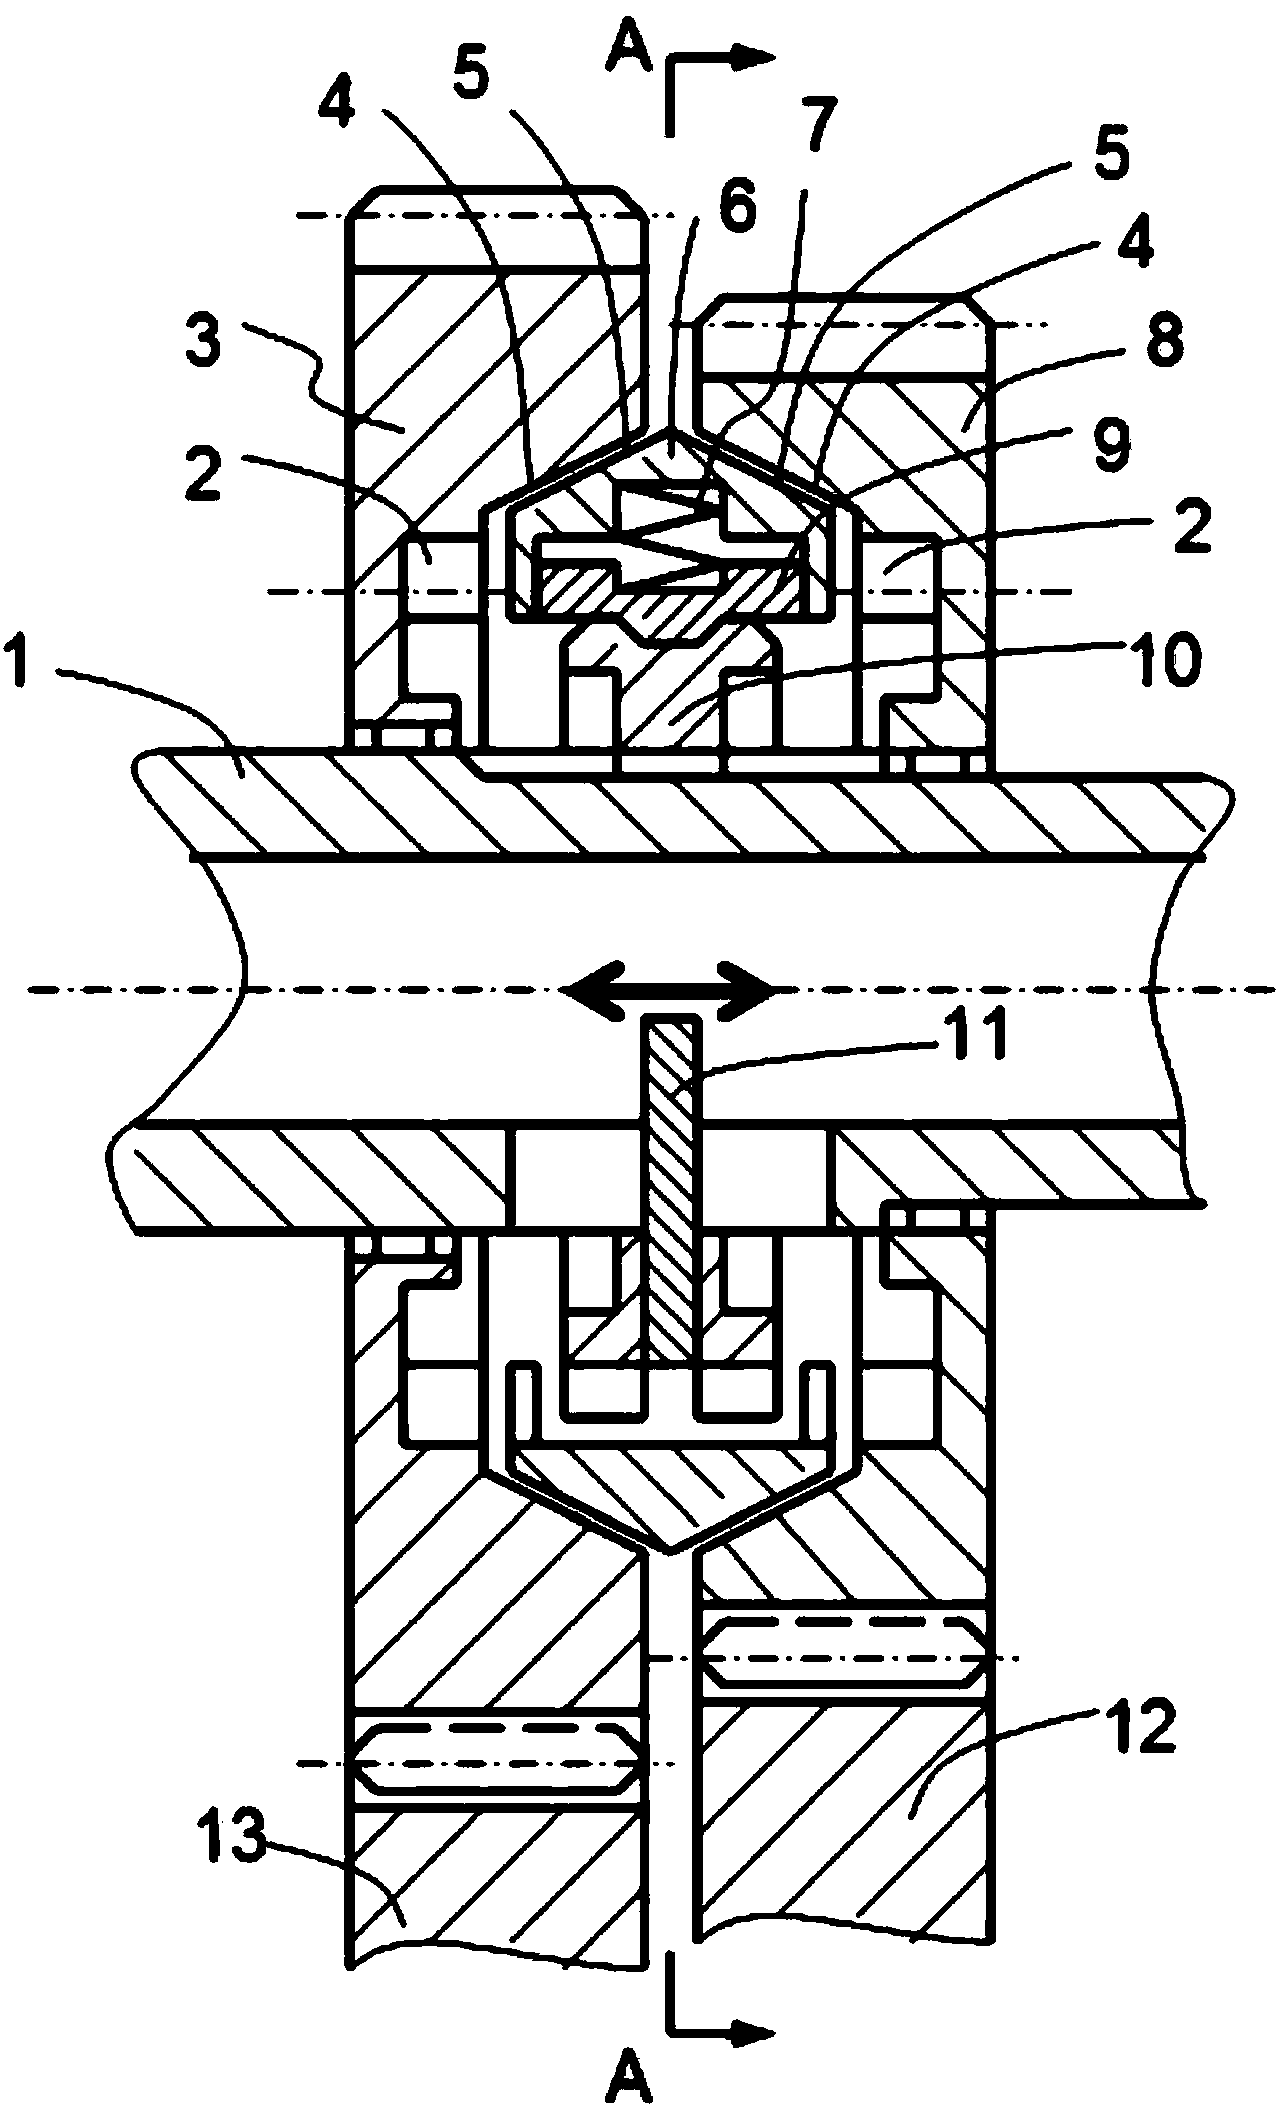 Built-in clutch and gear shifting control mechanism thereof